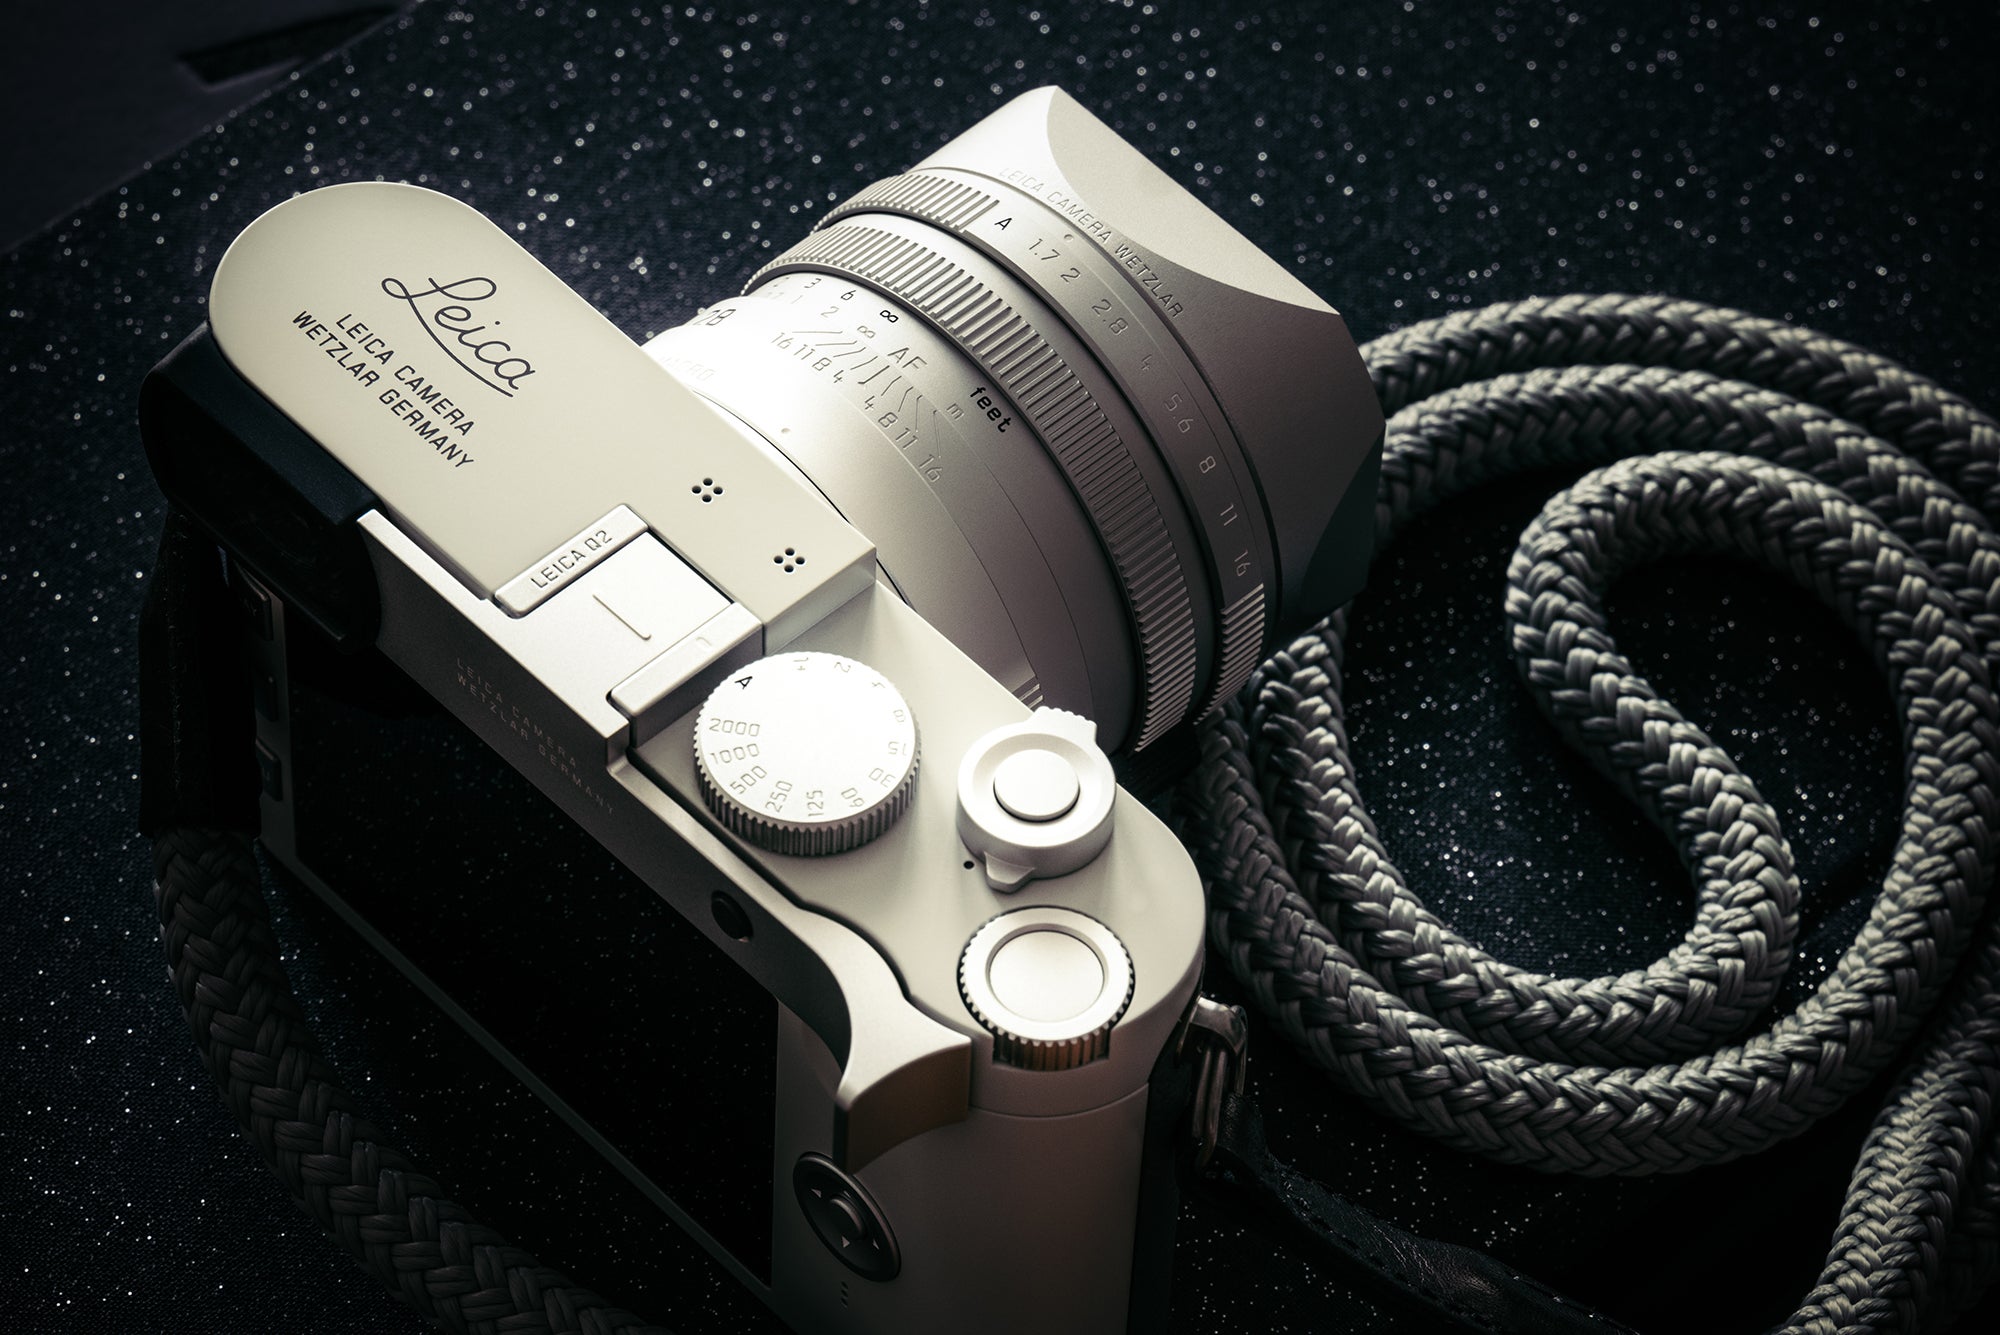 The Leica Q2 “Ghost” Set by Hodinkee